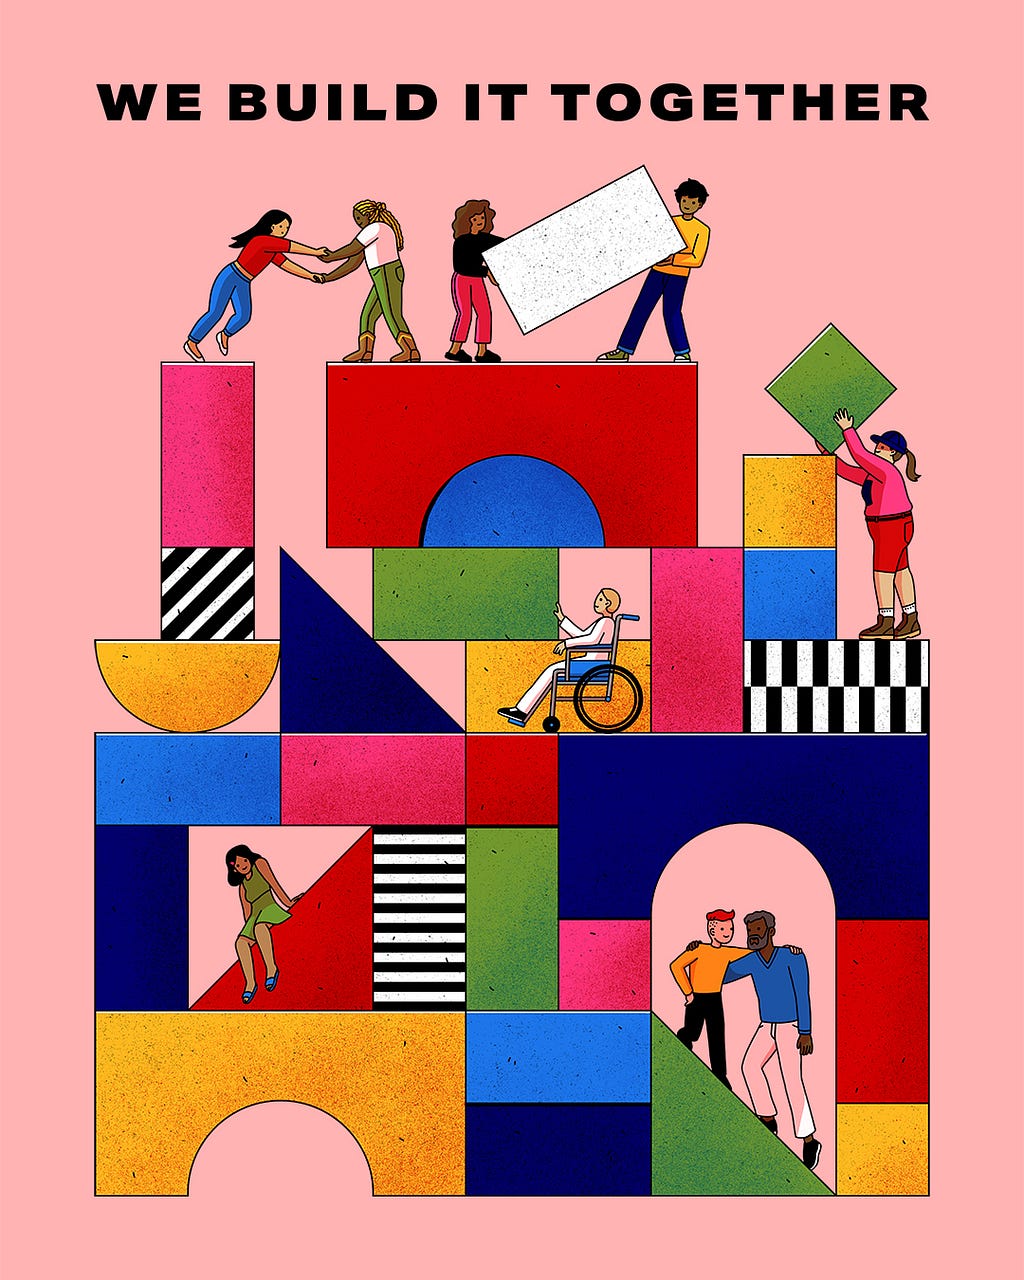 An illustration with the words ‘ We build it together’, featuring a building block structure with people from different backgrounds and identities putting the building blocks together.